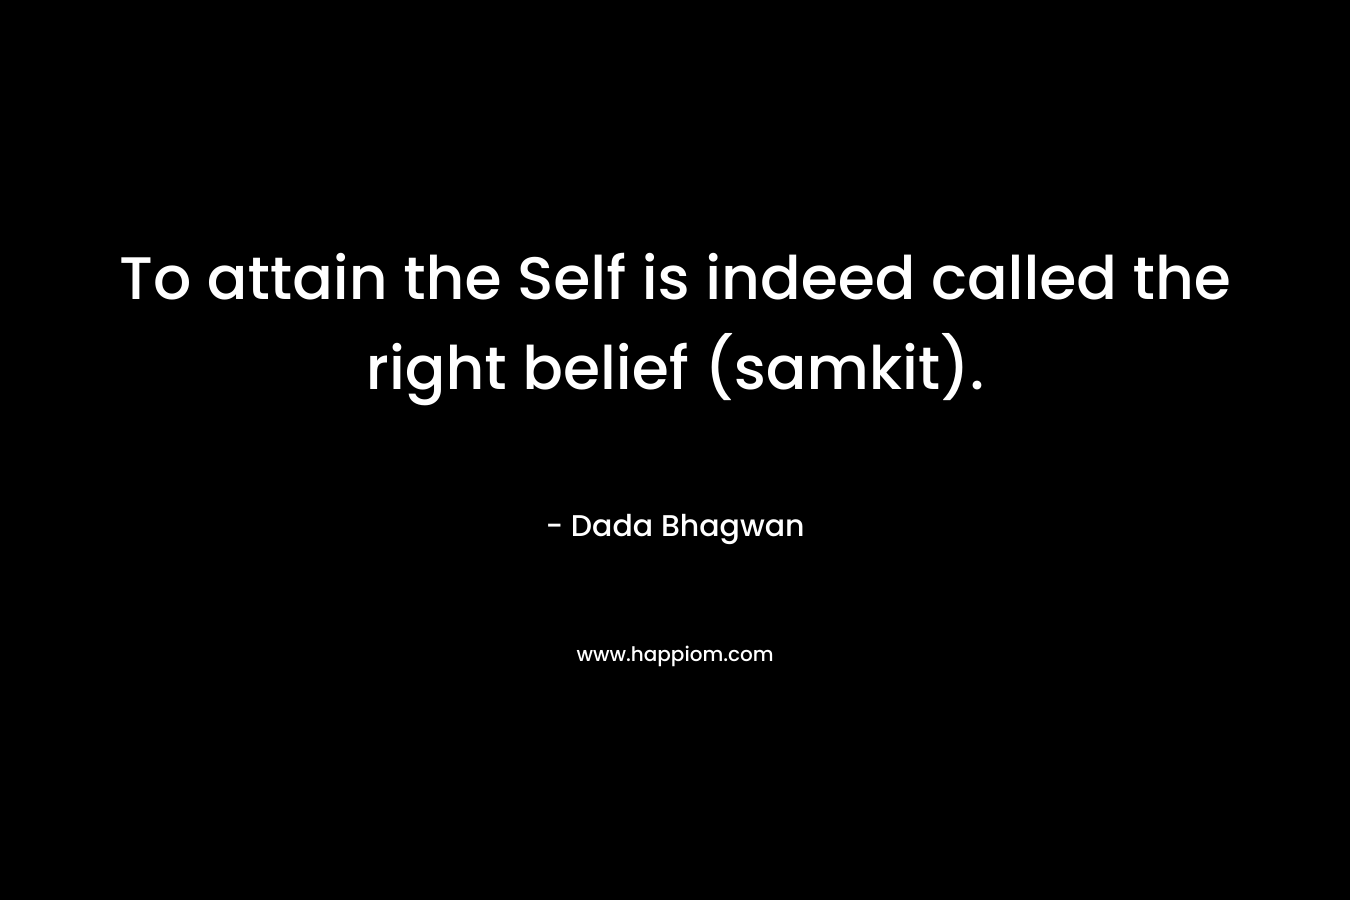 To attain the Self is indeed called the right belief (samkit).